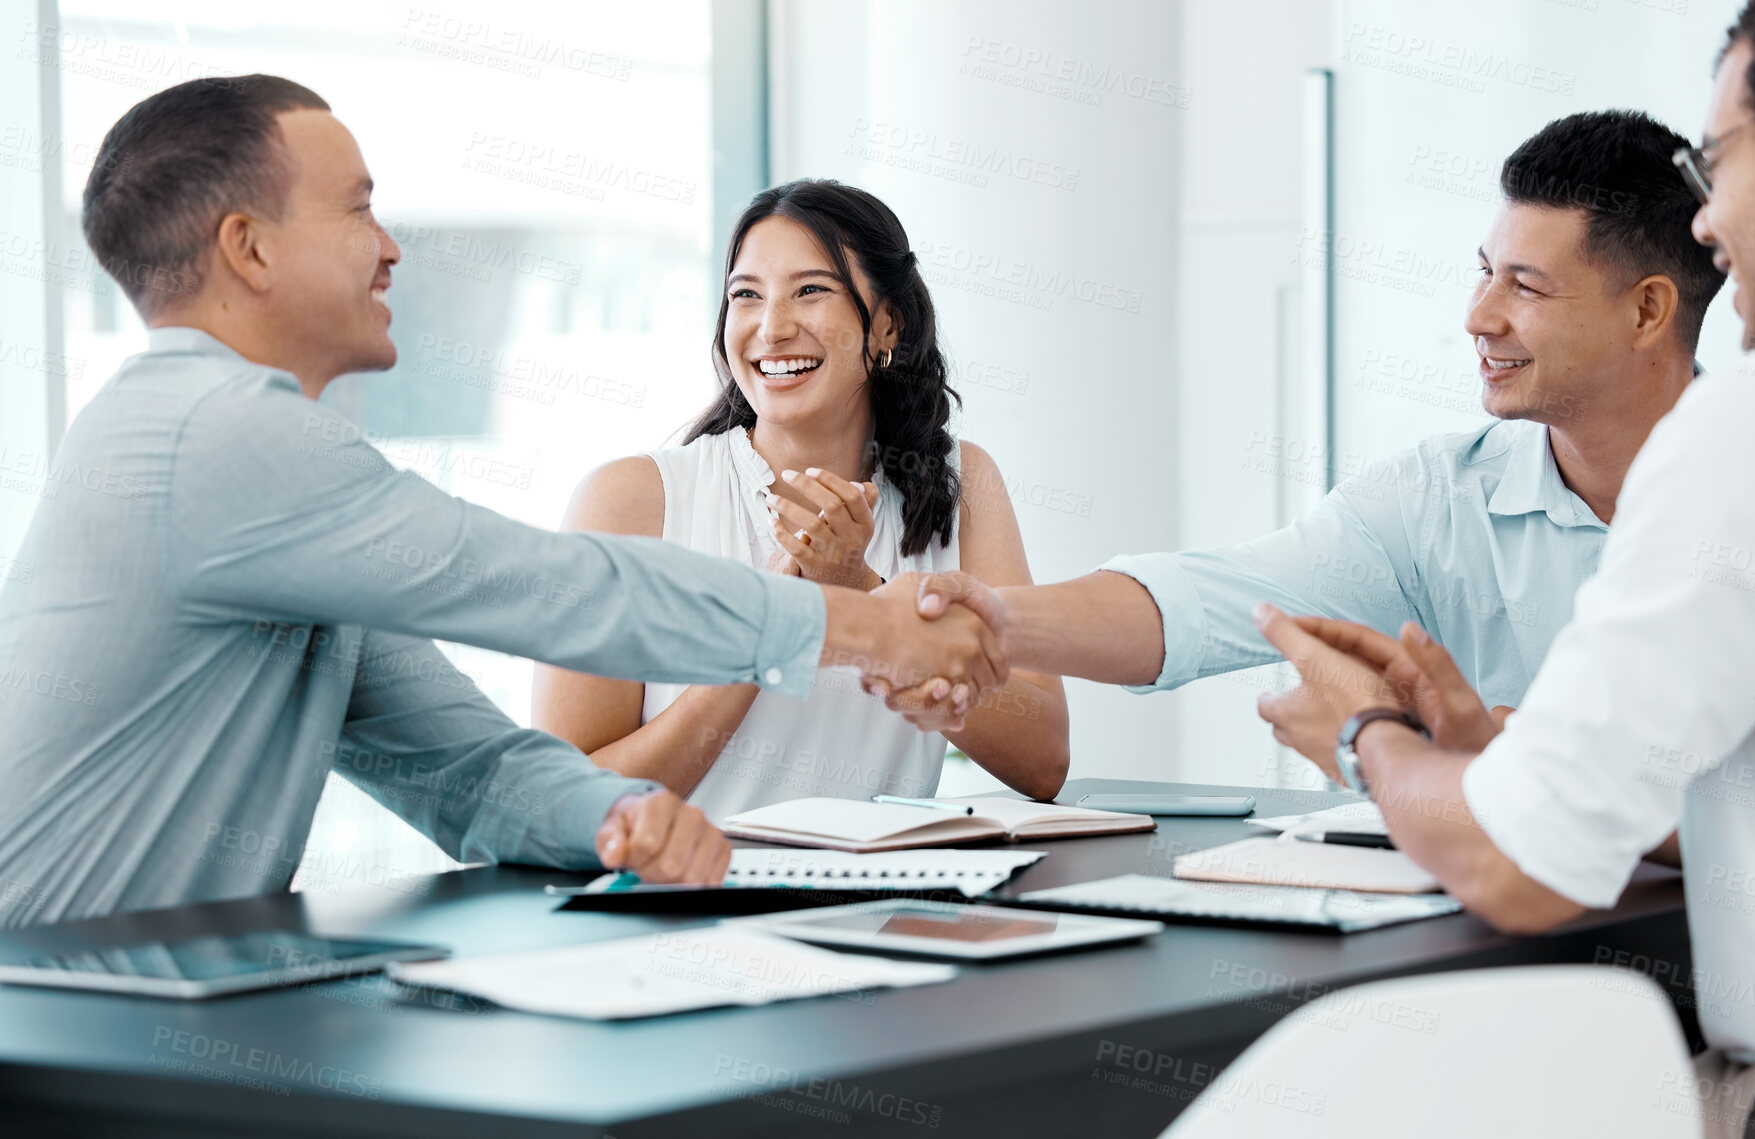 Buy stock photo Shot of businesspeople shaking hands during a meeting in an office